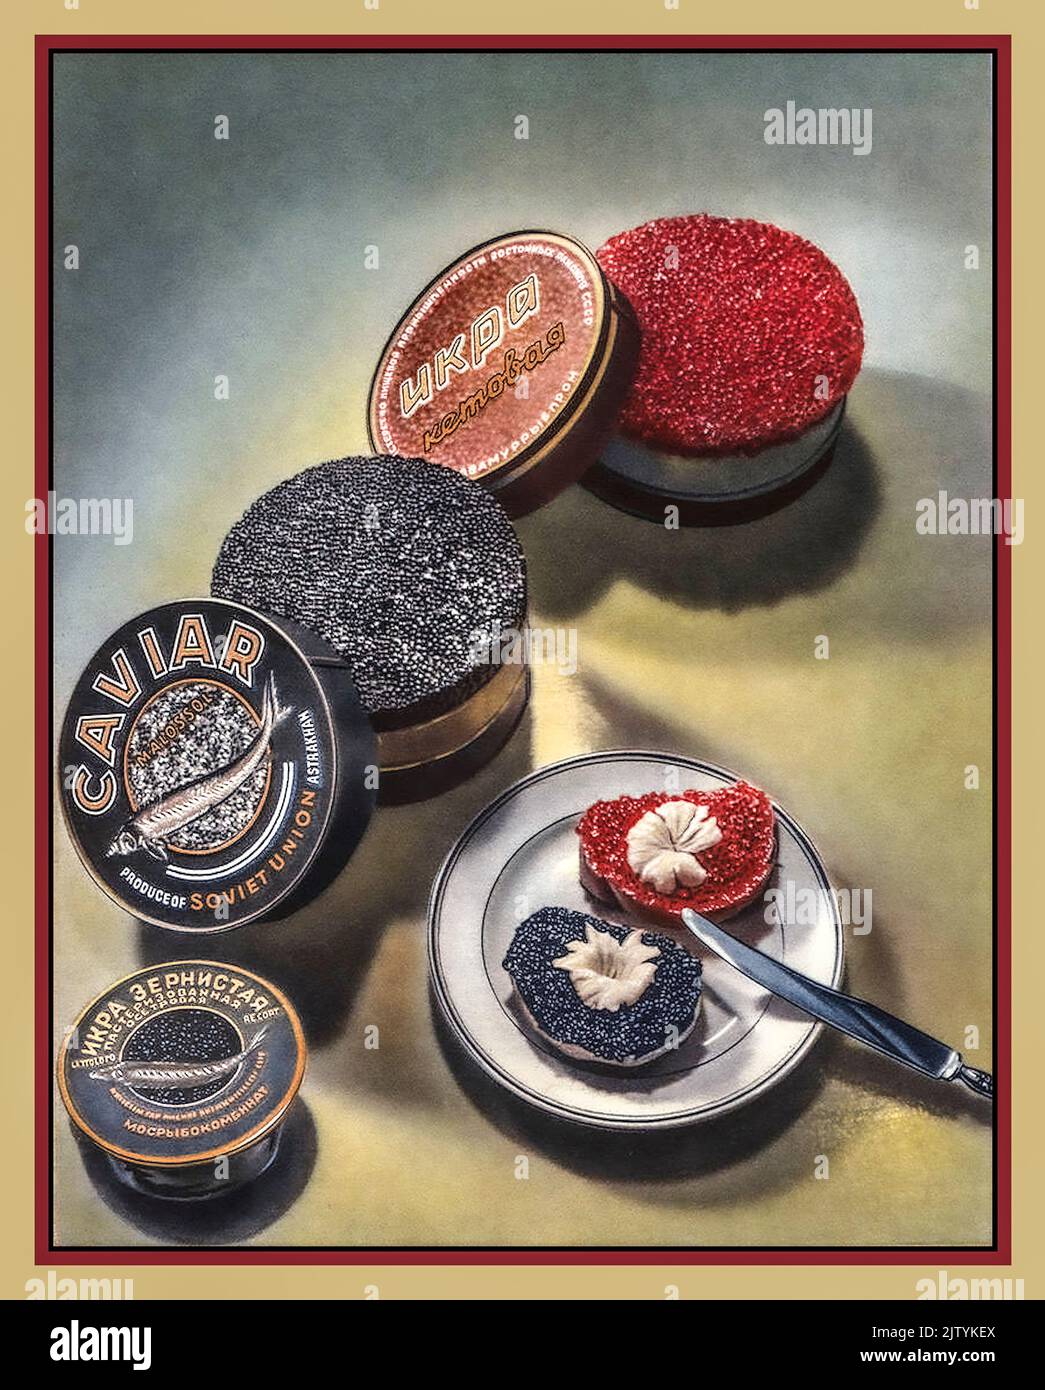 CAVIAR Vintage 1950s Soviet Union Advertising Poster Caviar luxury red & black varieties in tins Russian speciality fish foodstuff. Rare and very expensive Stock Photo